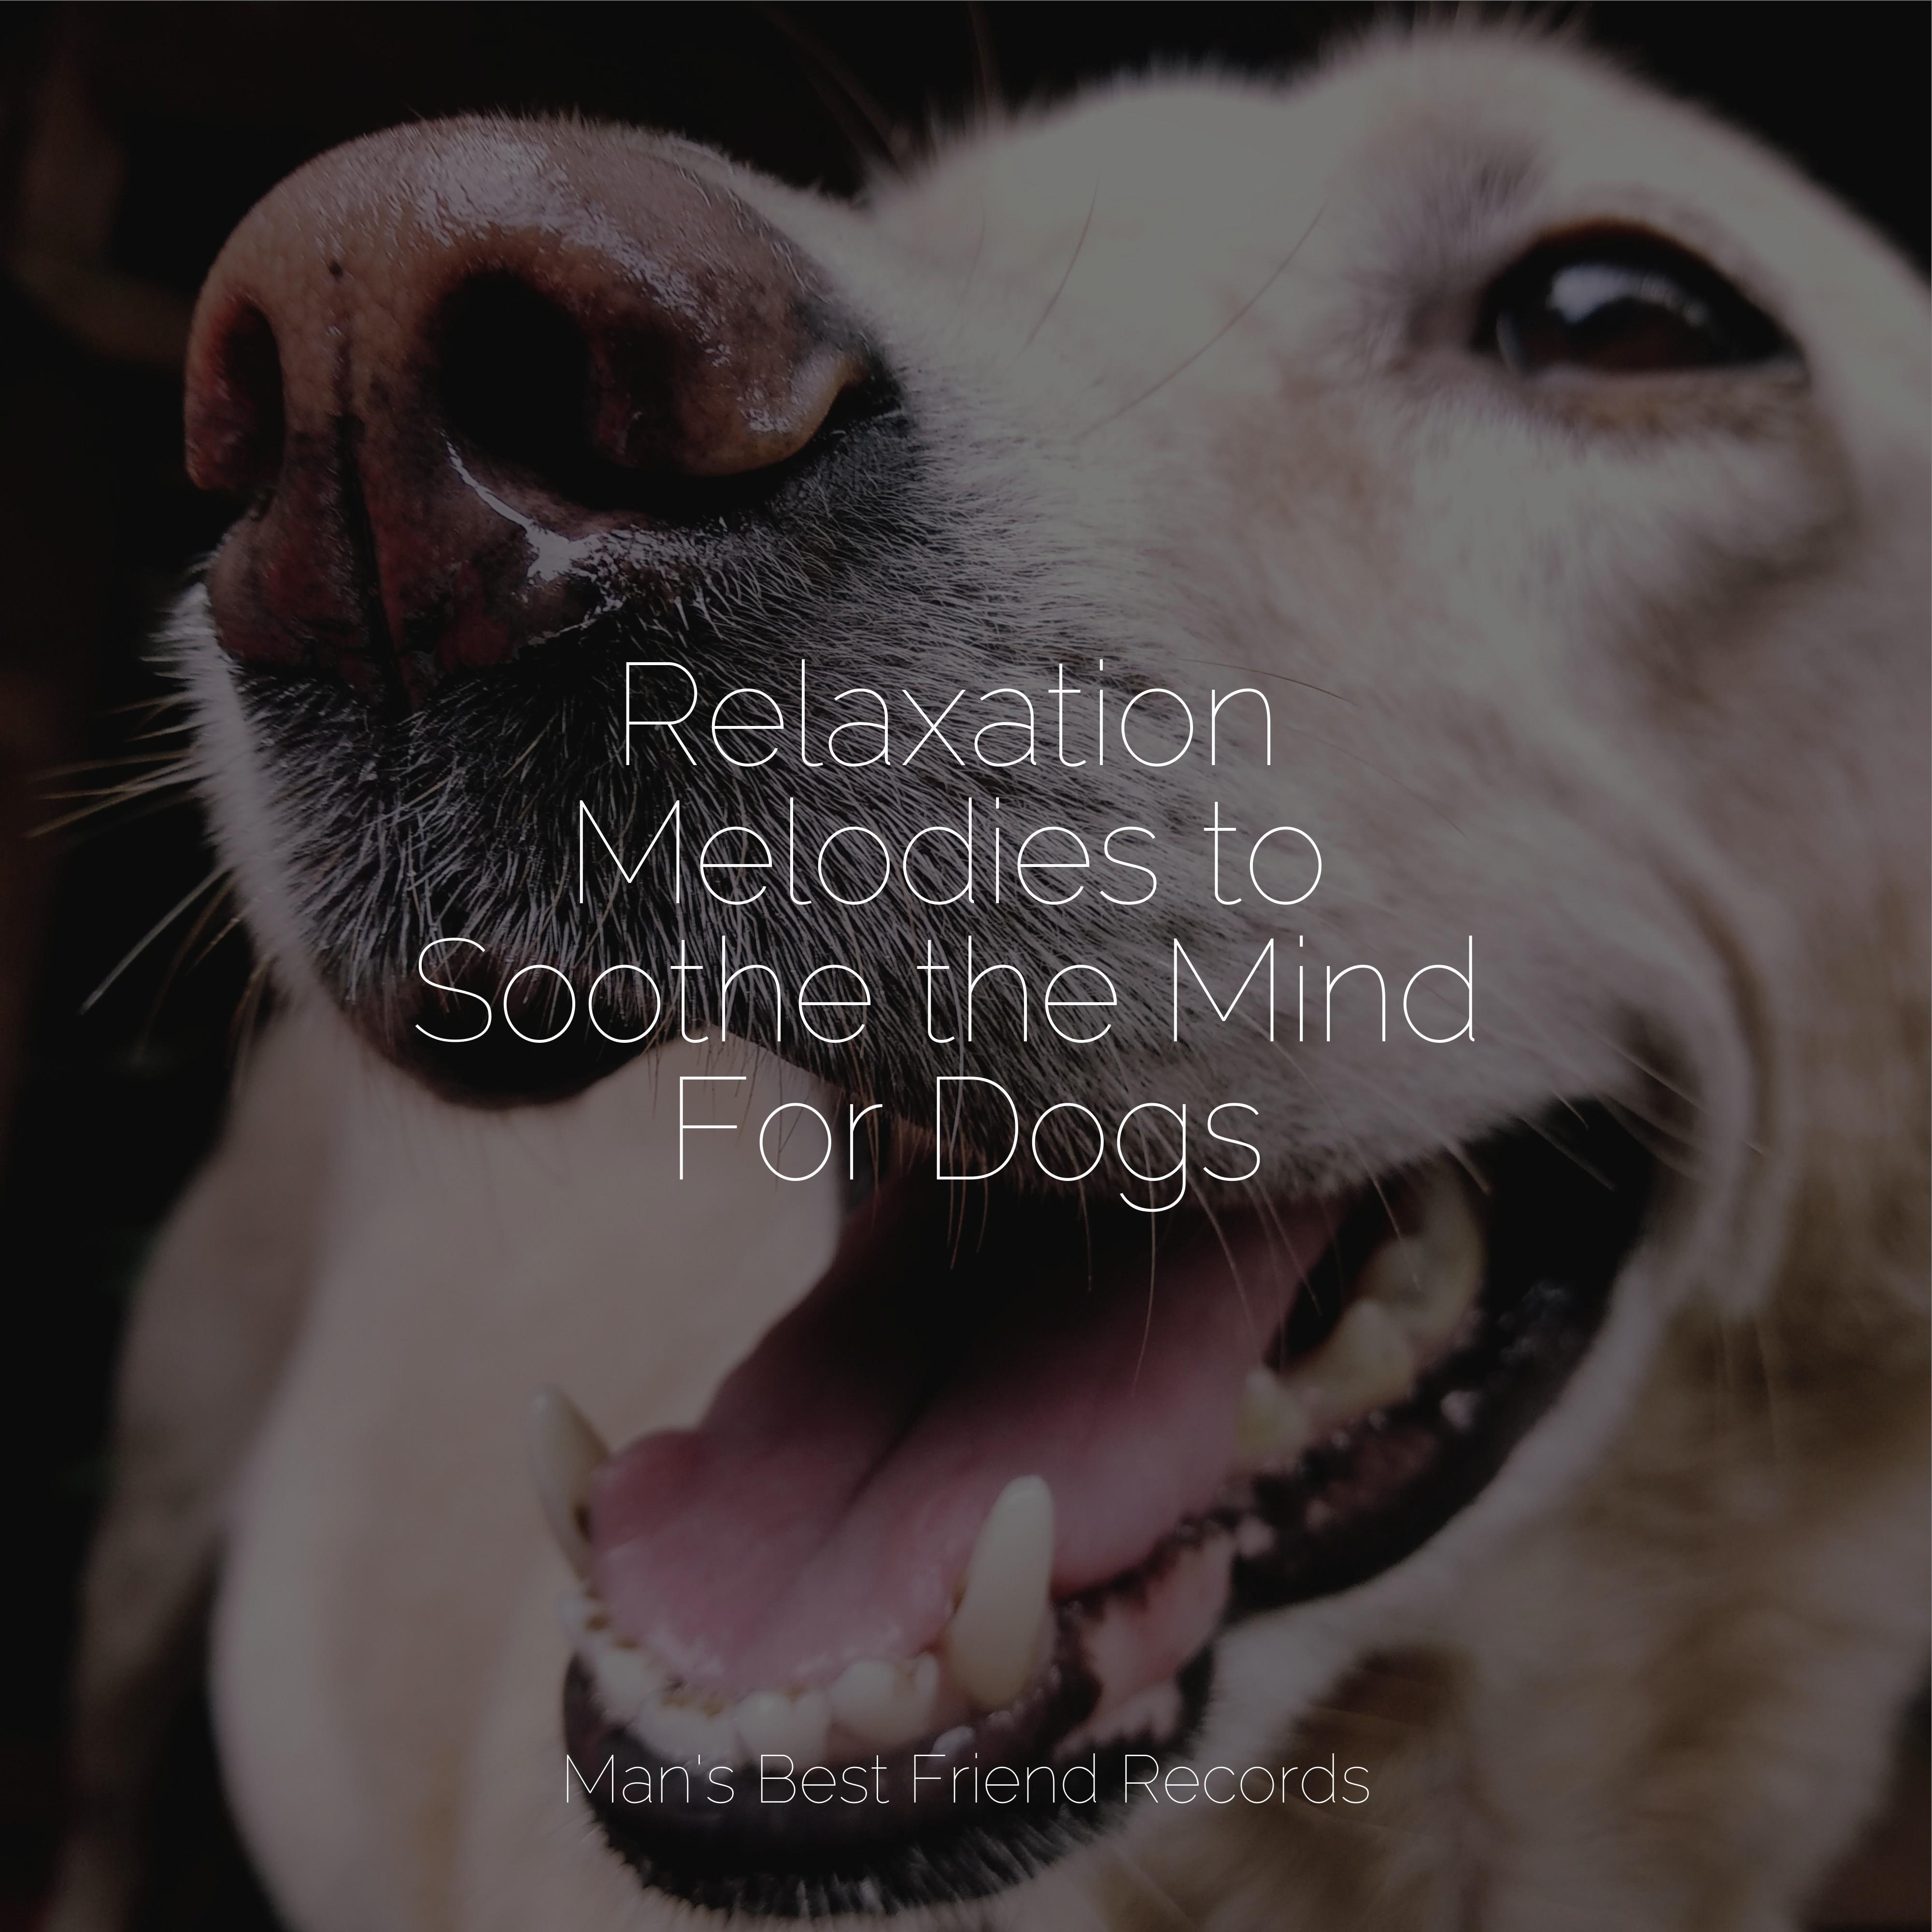 Music For Dogs Peace - A Time for Relaxation